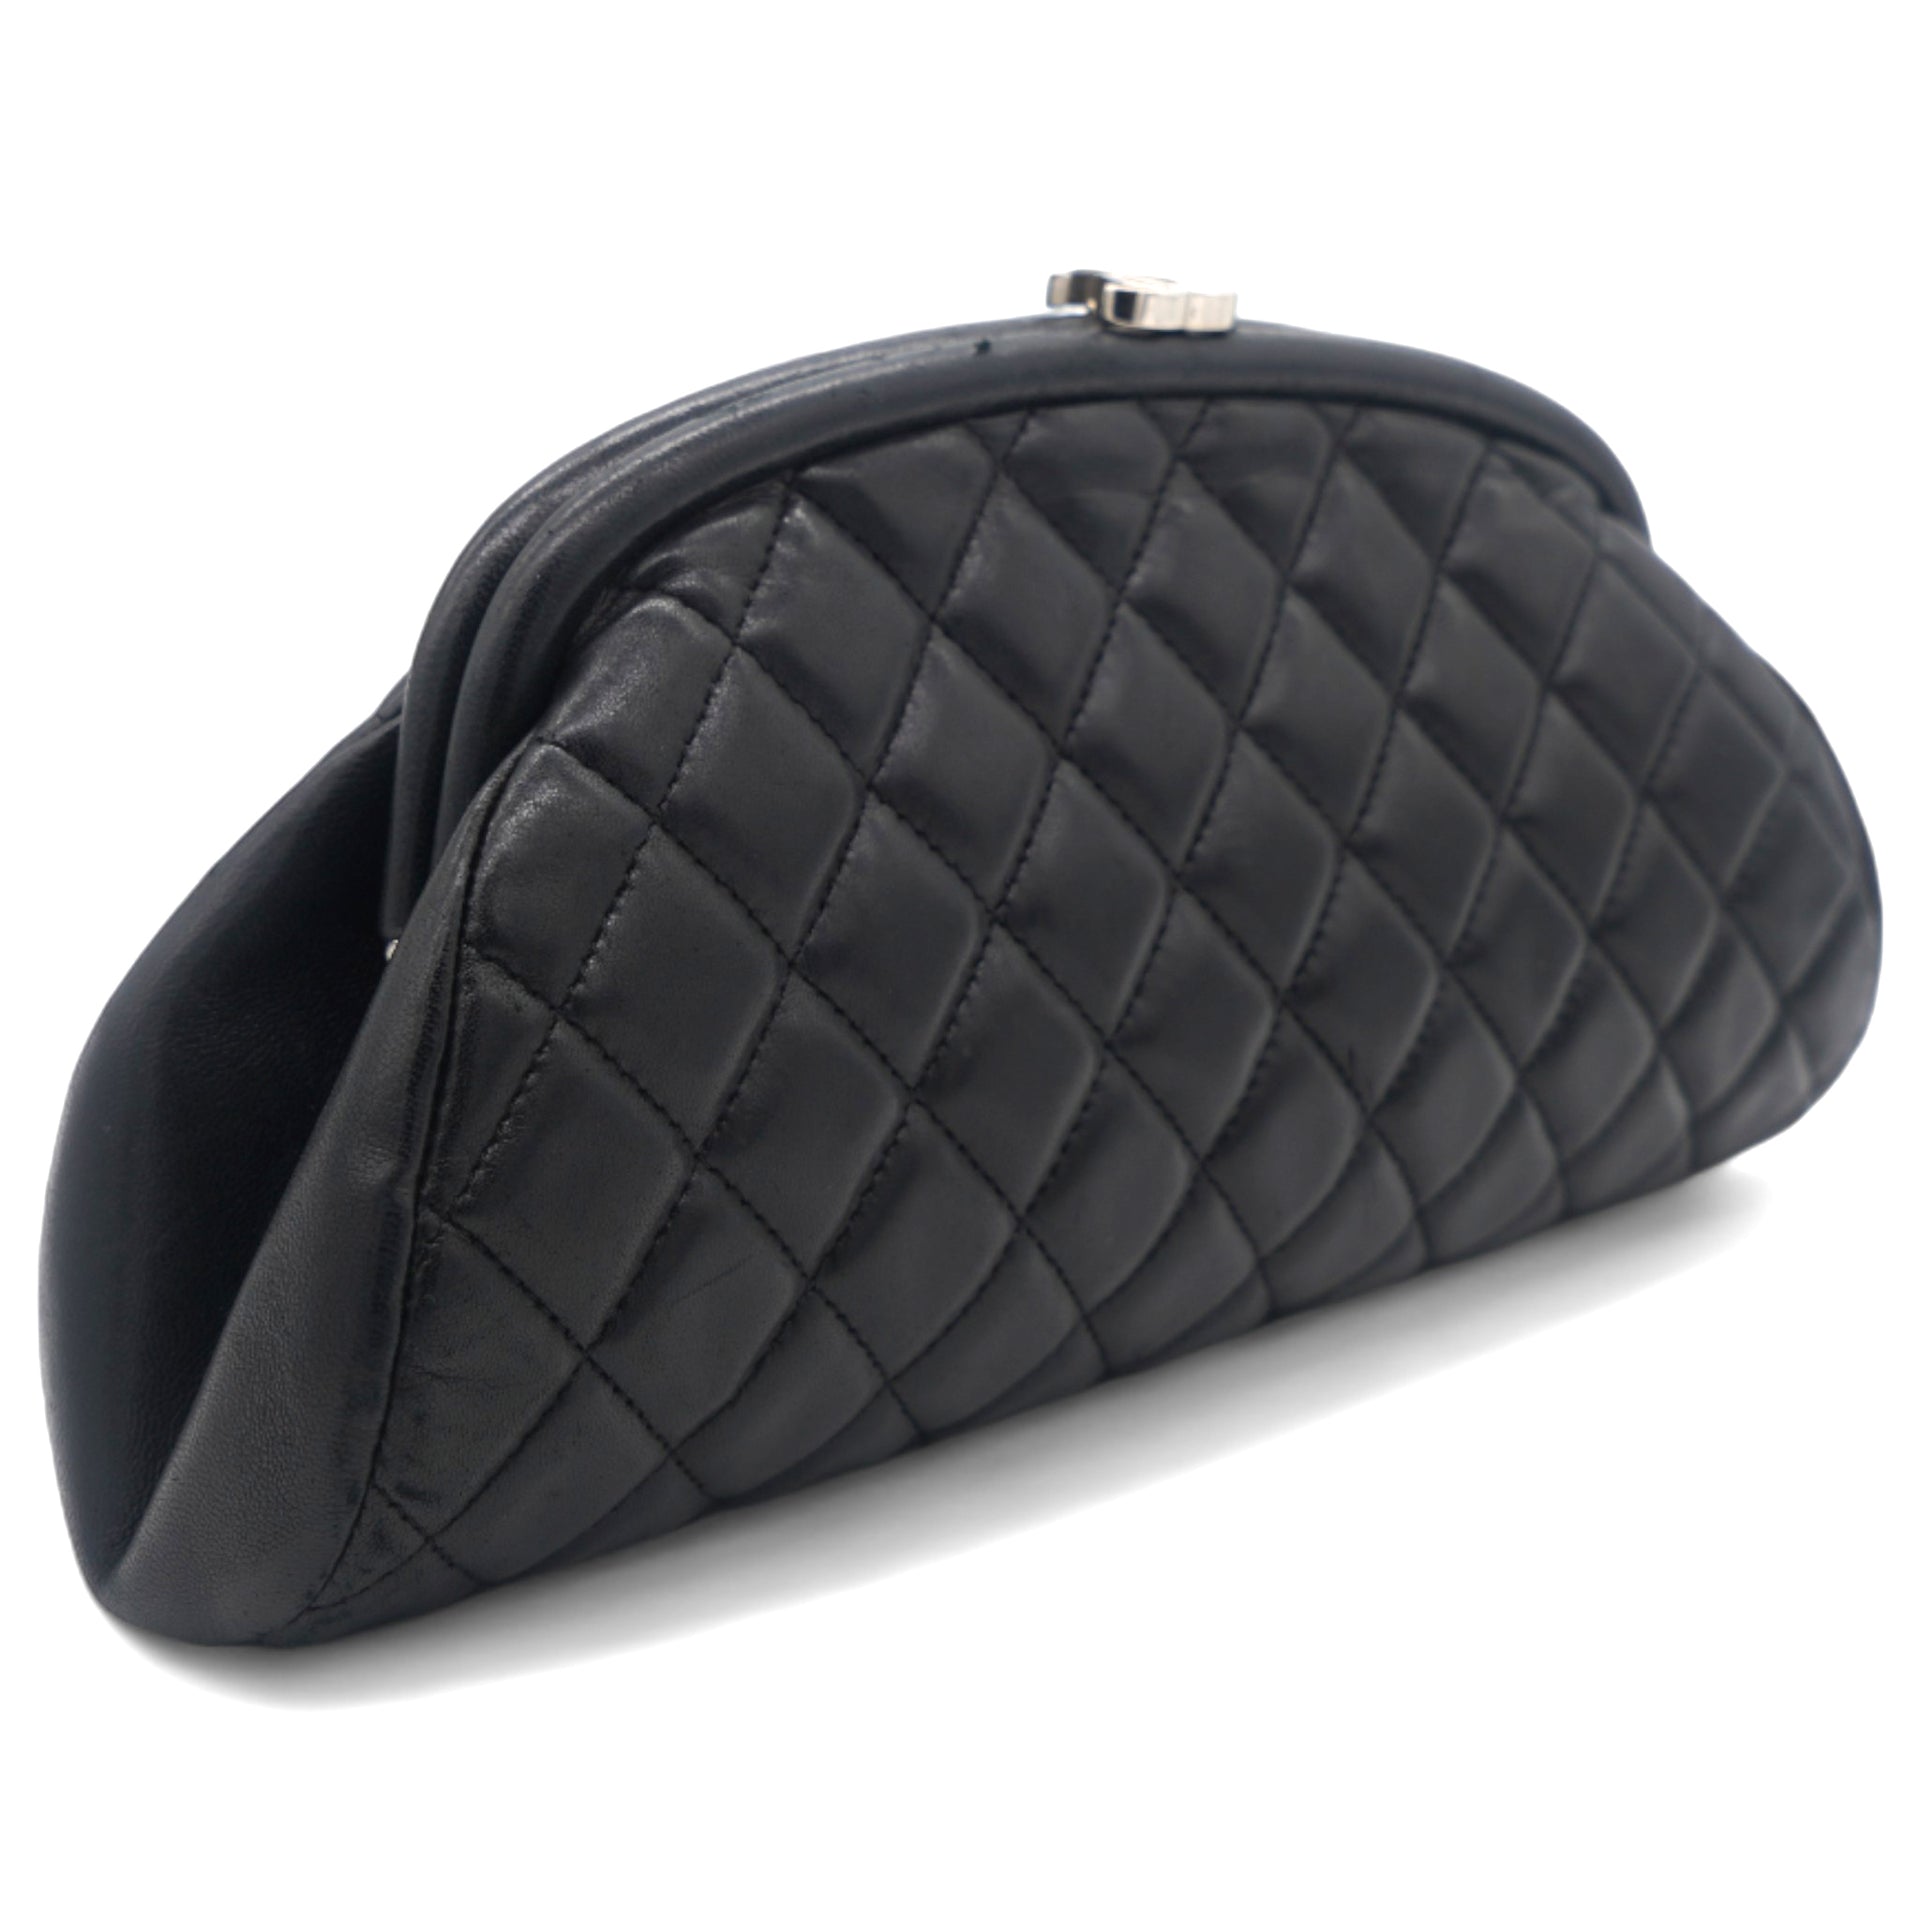 Lambskin Quilted Timeless Clutch Black